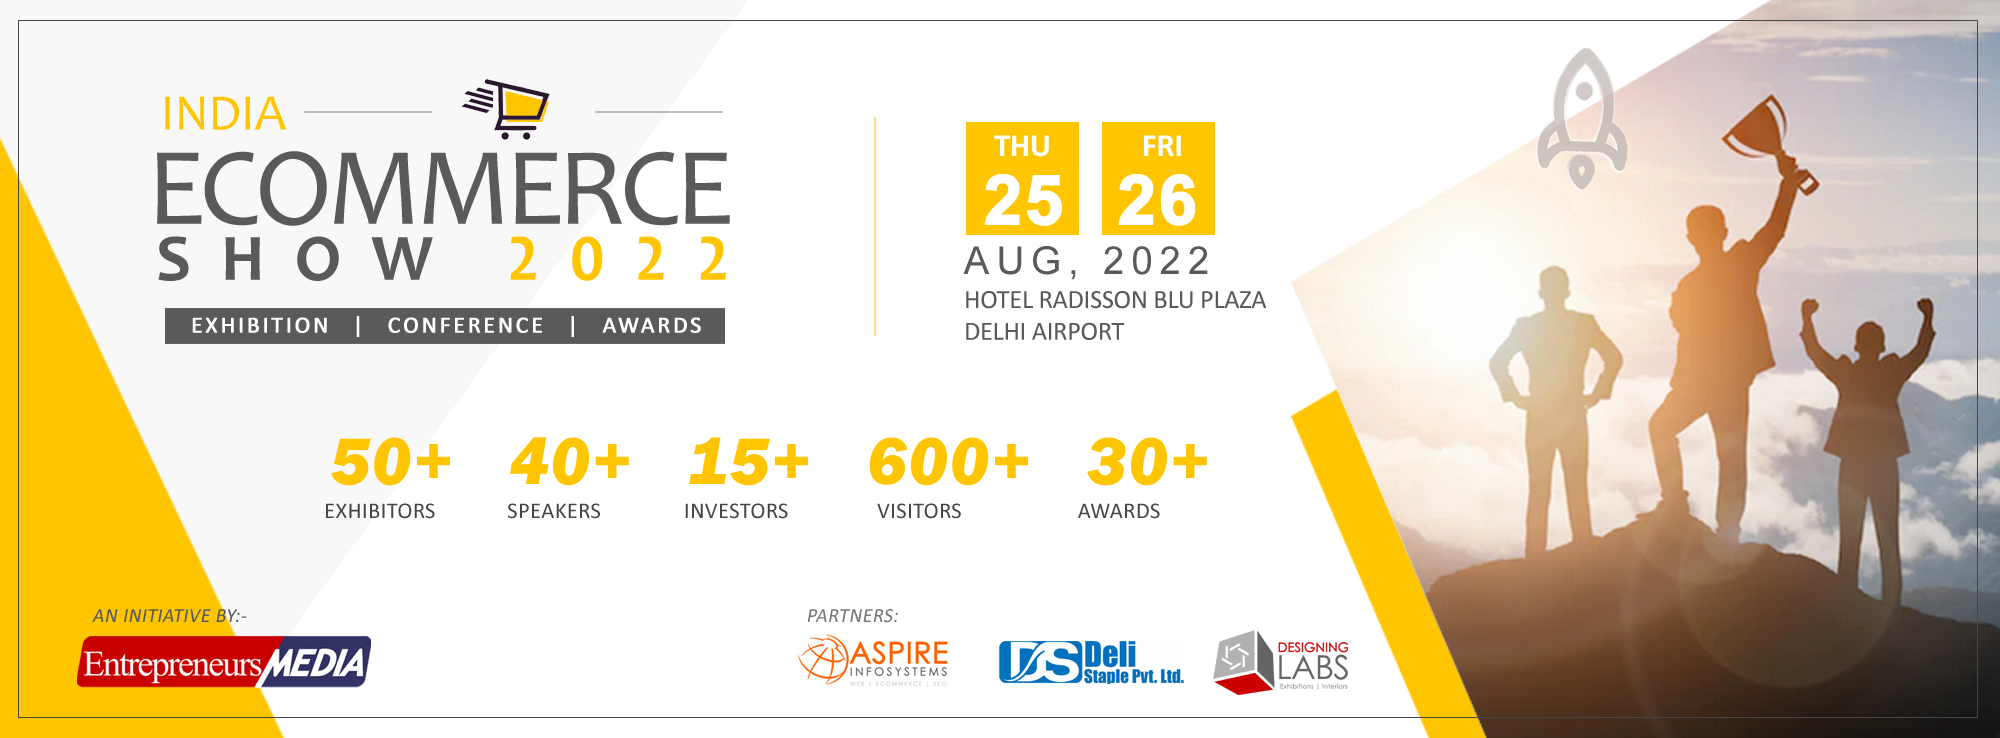 Entrepreneurs Media launches first edition of India Ecommerce Show 2022 Exhibition & Conference at Hotel Radisson Delhi Airport in August.